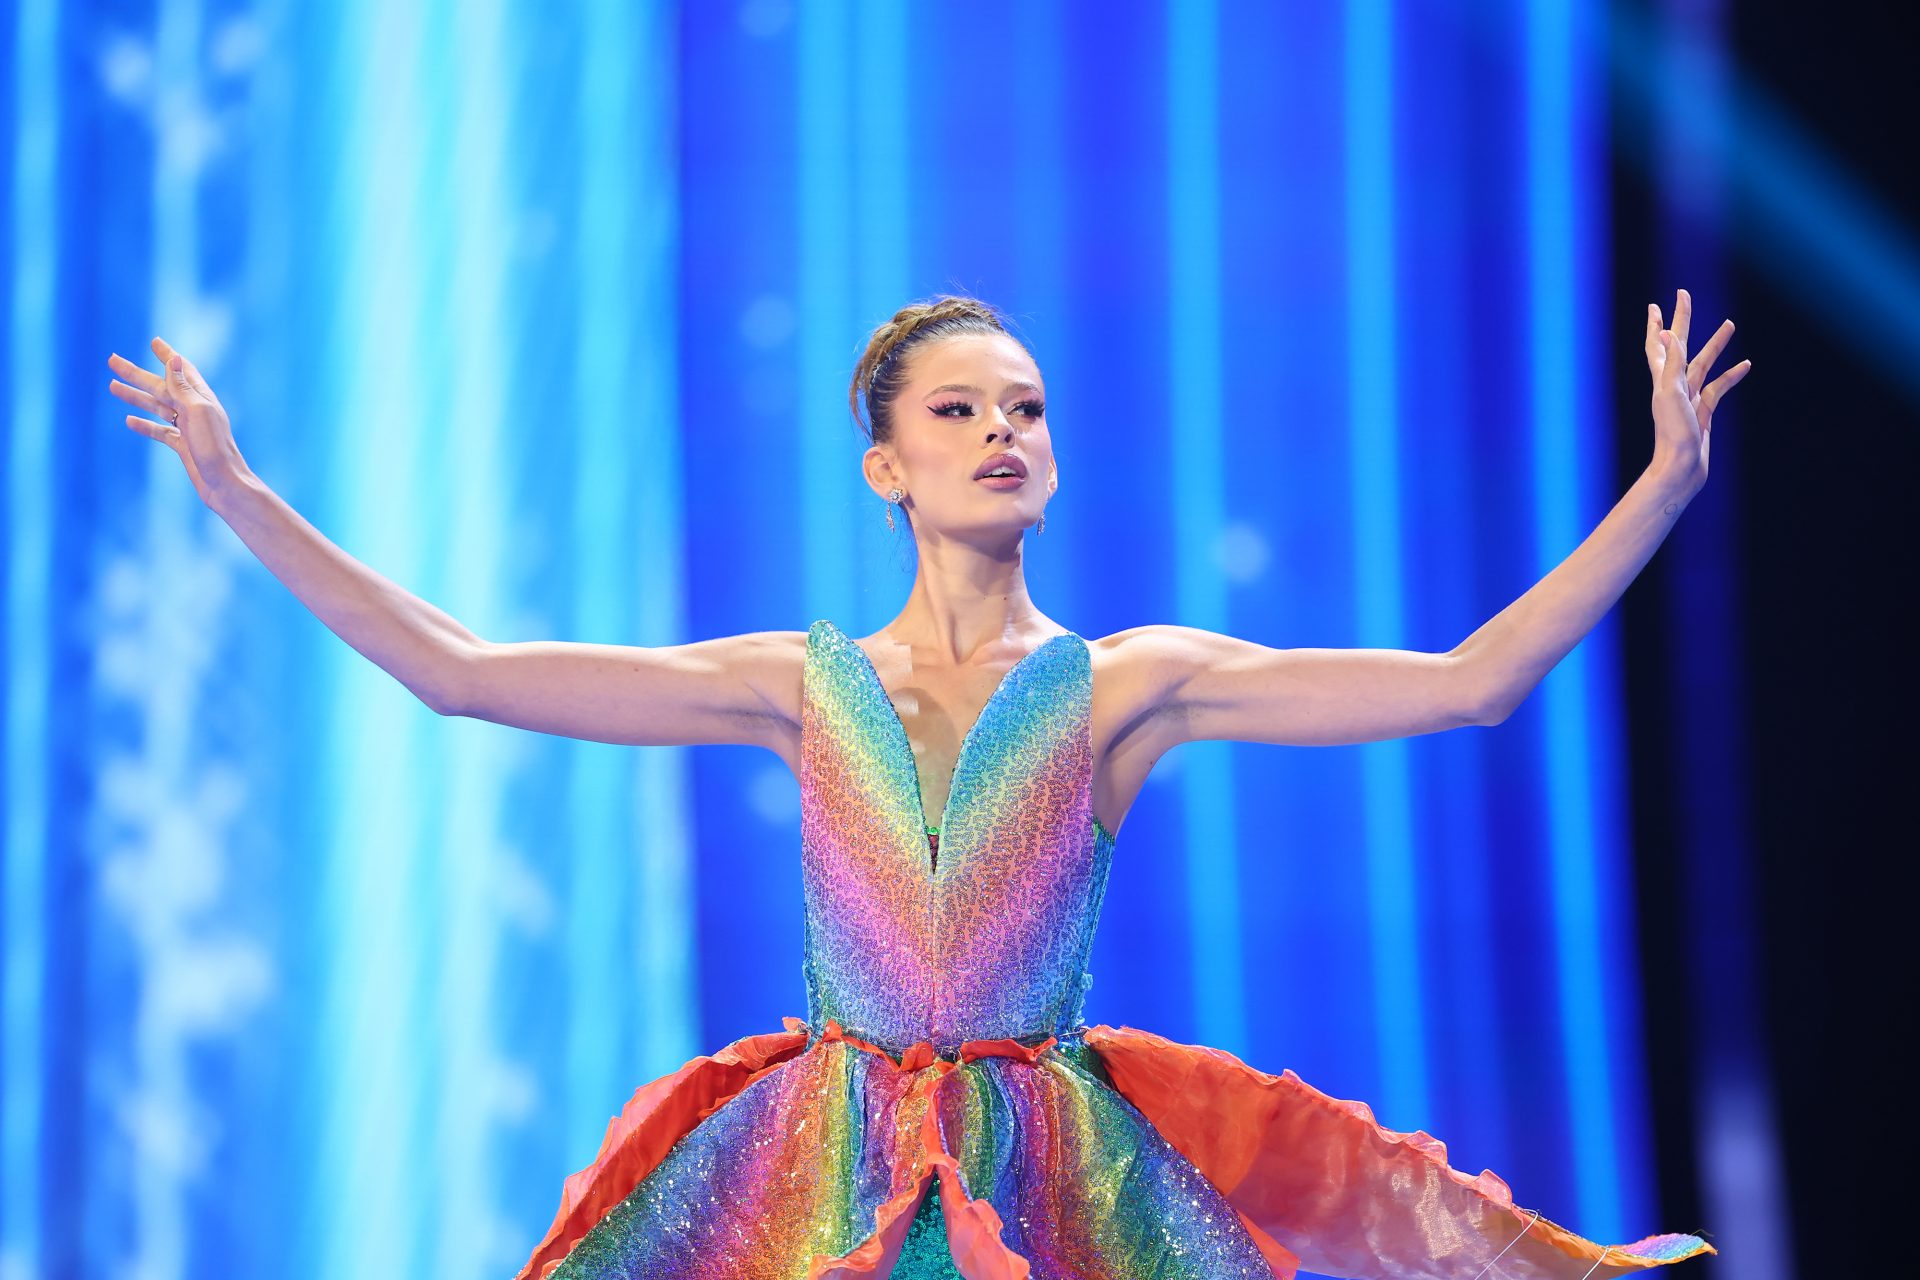 Rikkie Kollé's national costume had a special message